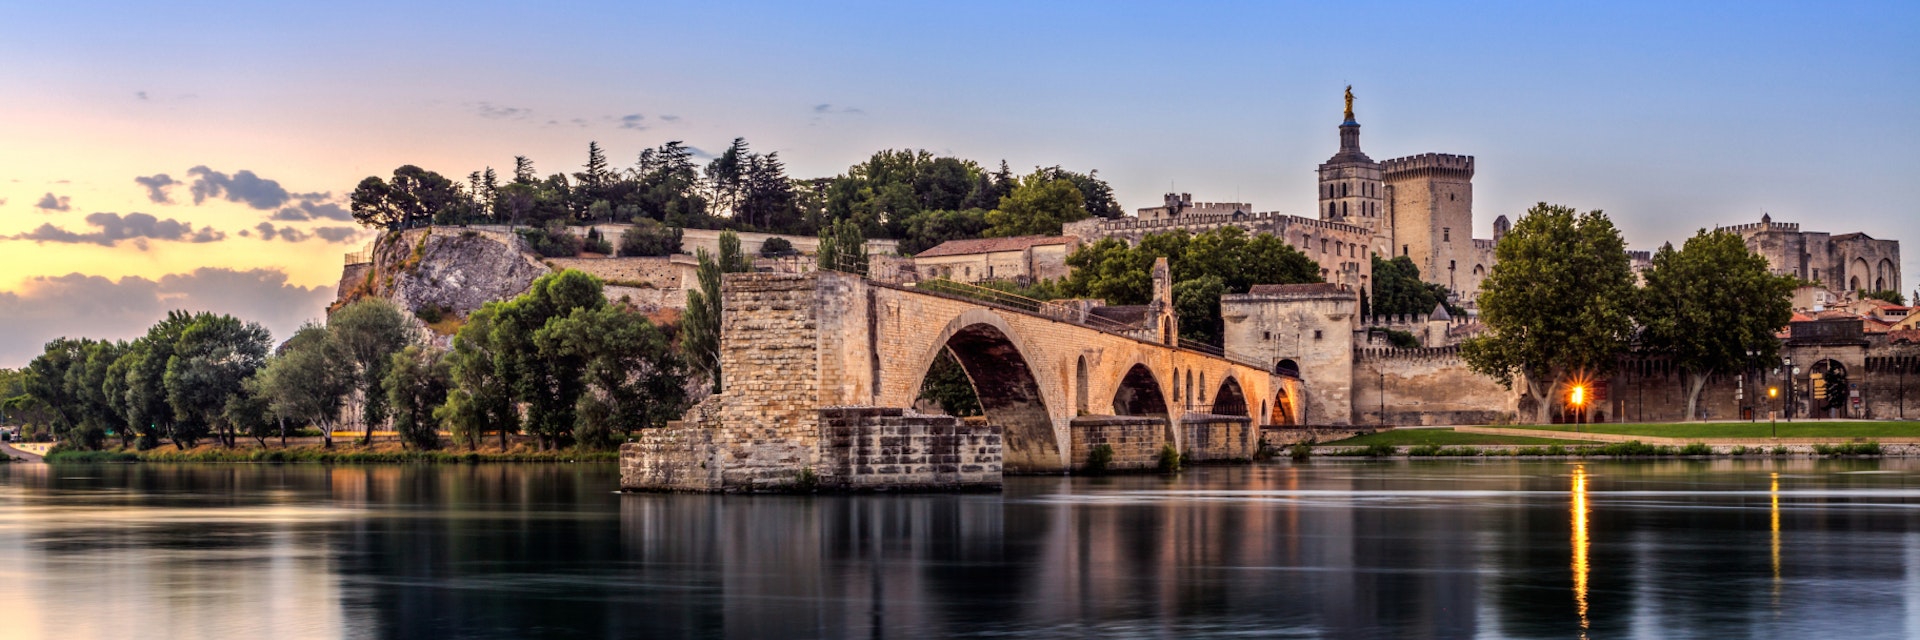 Avignon Bridge with Popes Palace and Rhone river at sunrise, Pont Saint-Benezet, Provence, France ; Shutterstock ID 362631386; Your name (First / Last): Daniel Fahey; GL account no.: 65050; Netsuite department name: Online Editorial; Full Product or Project name including edition: Best in Europe POIs